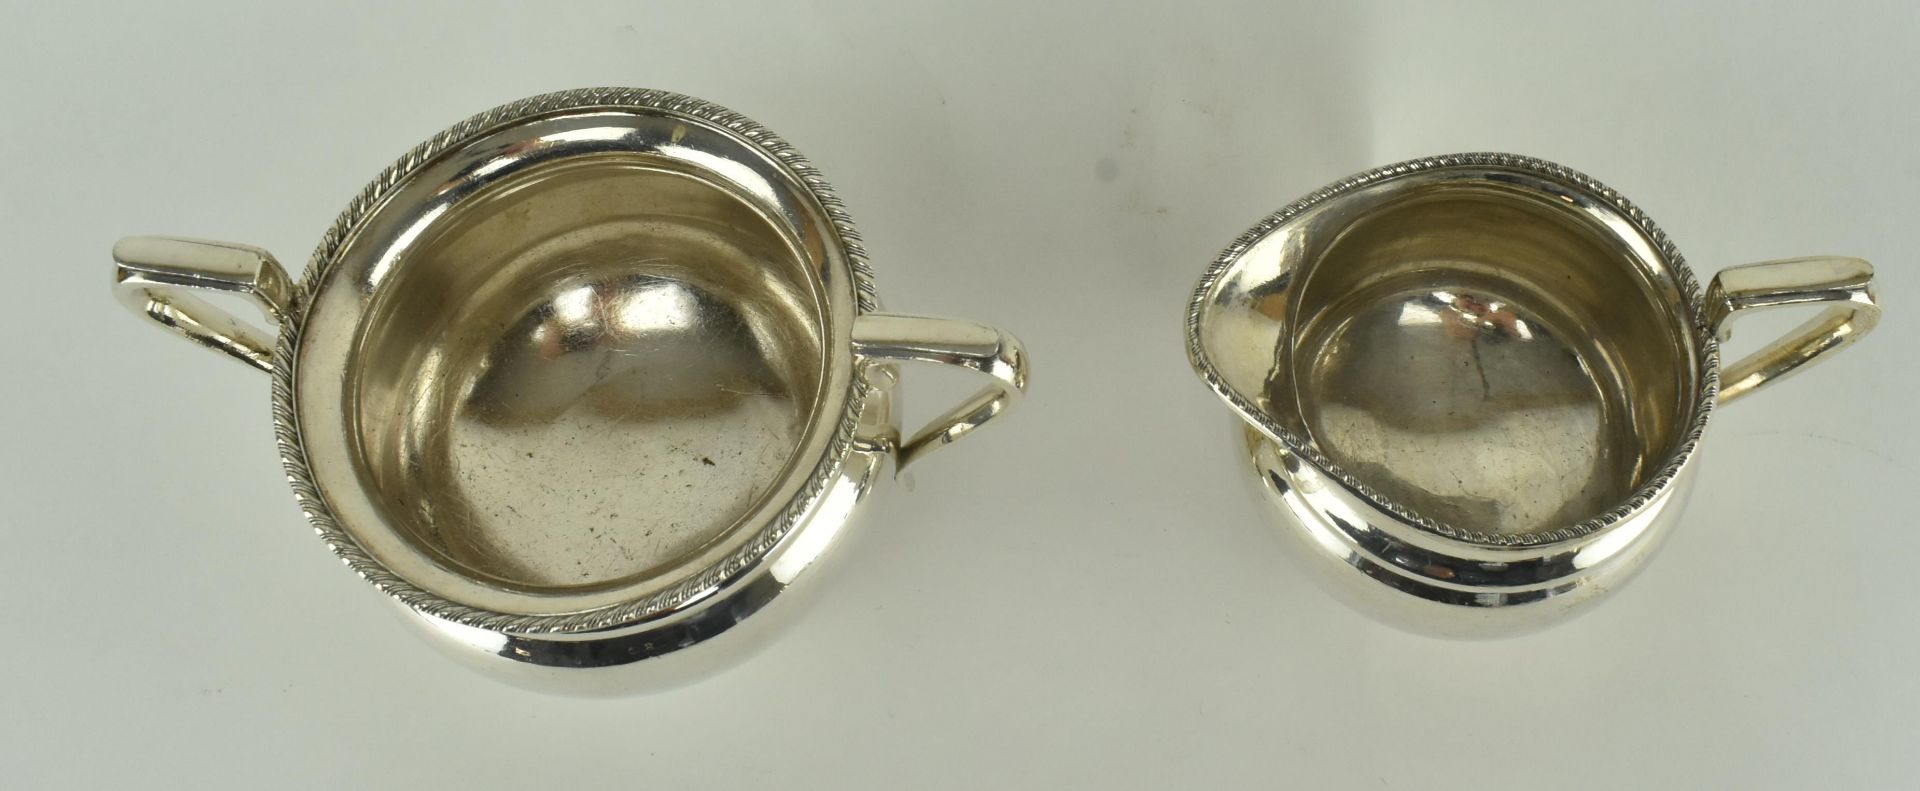 COLLECTION OF EDWARDIAN & LATER SILVER PLATED TABLEWARE - Image 8 of 10